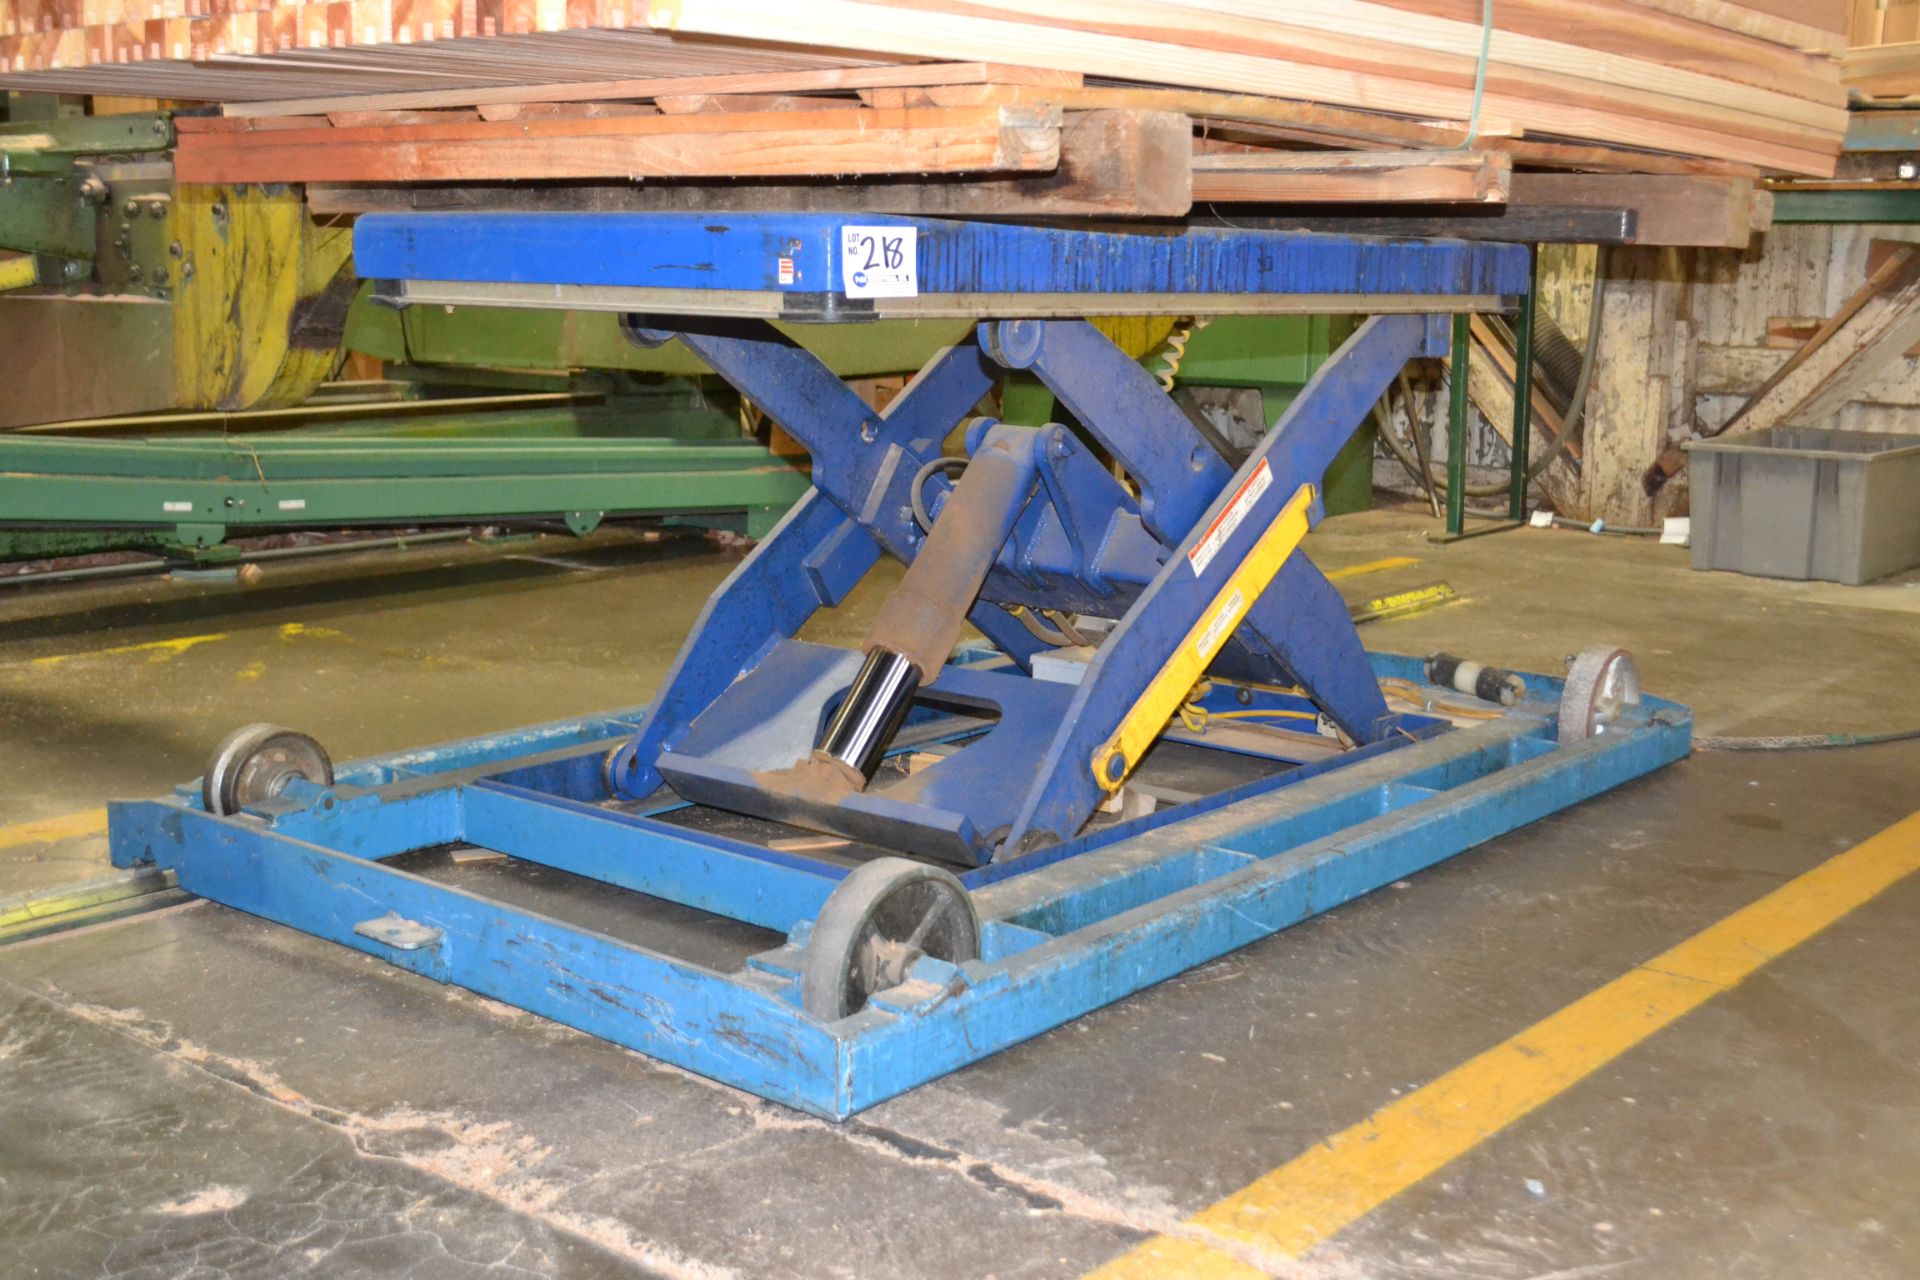 5' x 31" Scissor Lift c/w 20' Track and Load Station (Lumber not included)